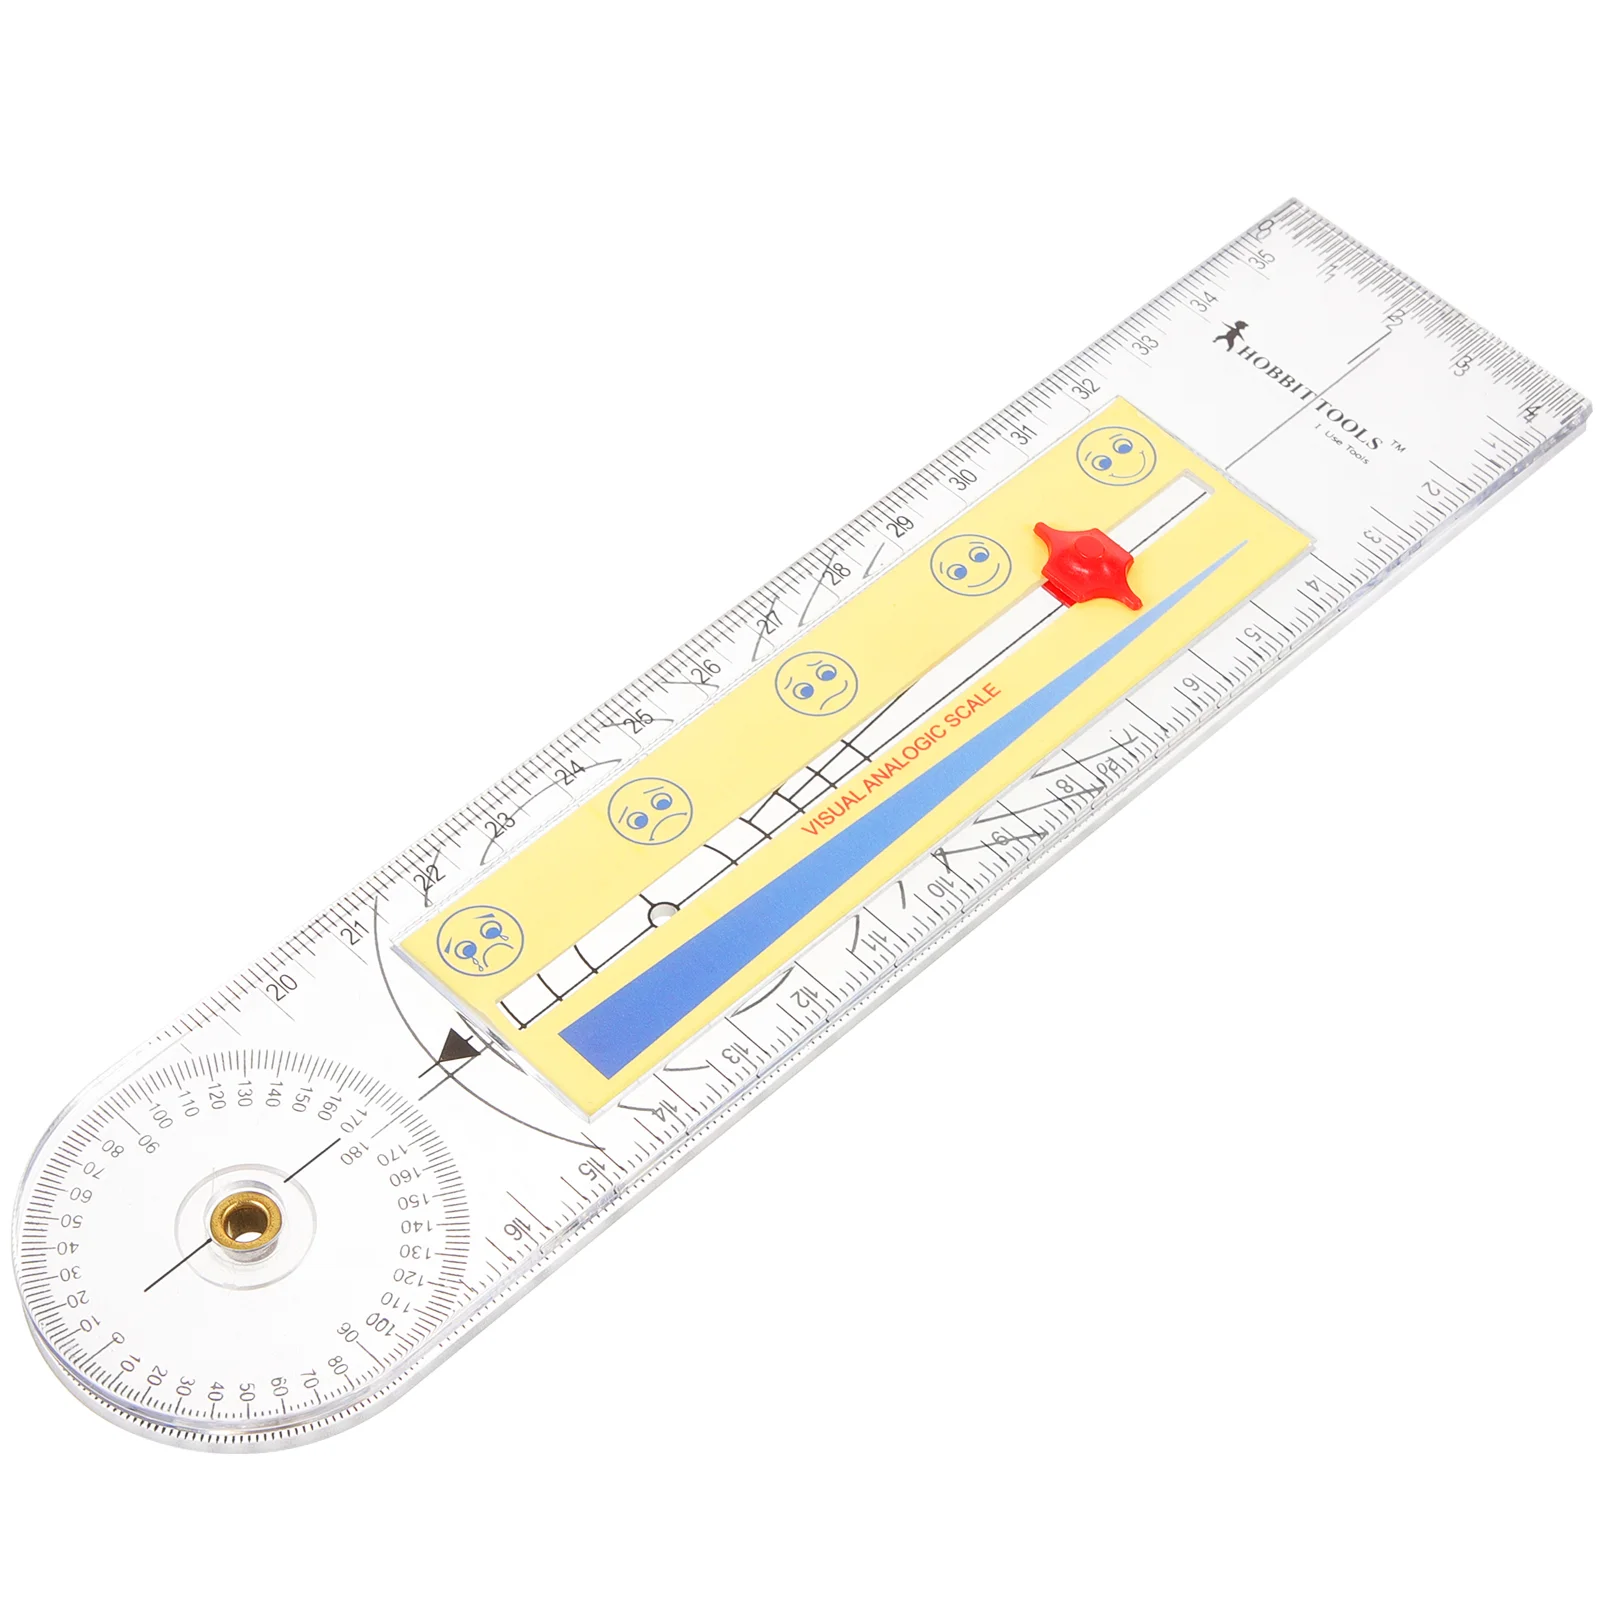 Angle Finder Tool Finger Goniometer Measuring Rotary Medical Abs Ruler Hospital Folding angle ruler clear plastic goniometer foldable tool protractor rotary measuring tape